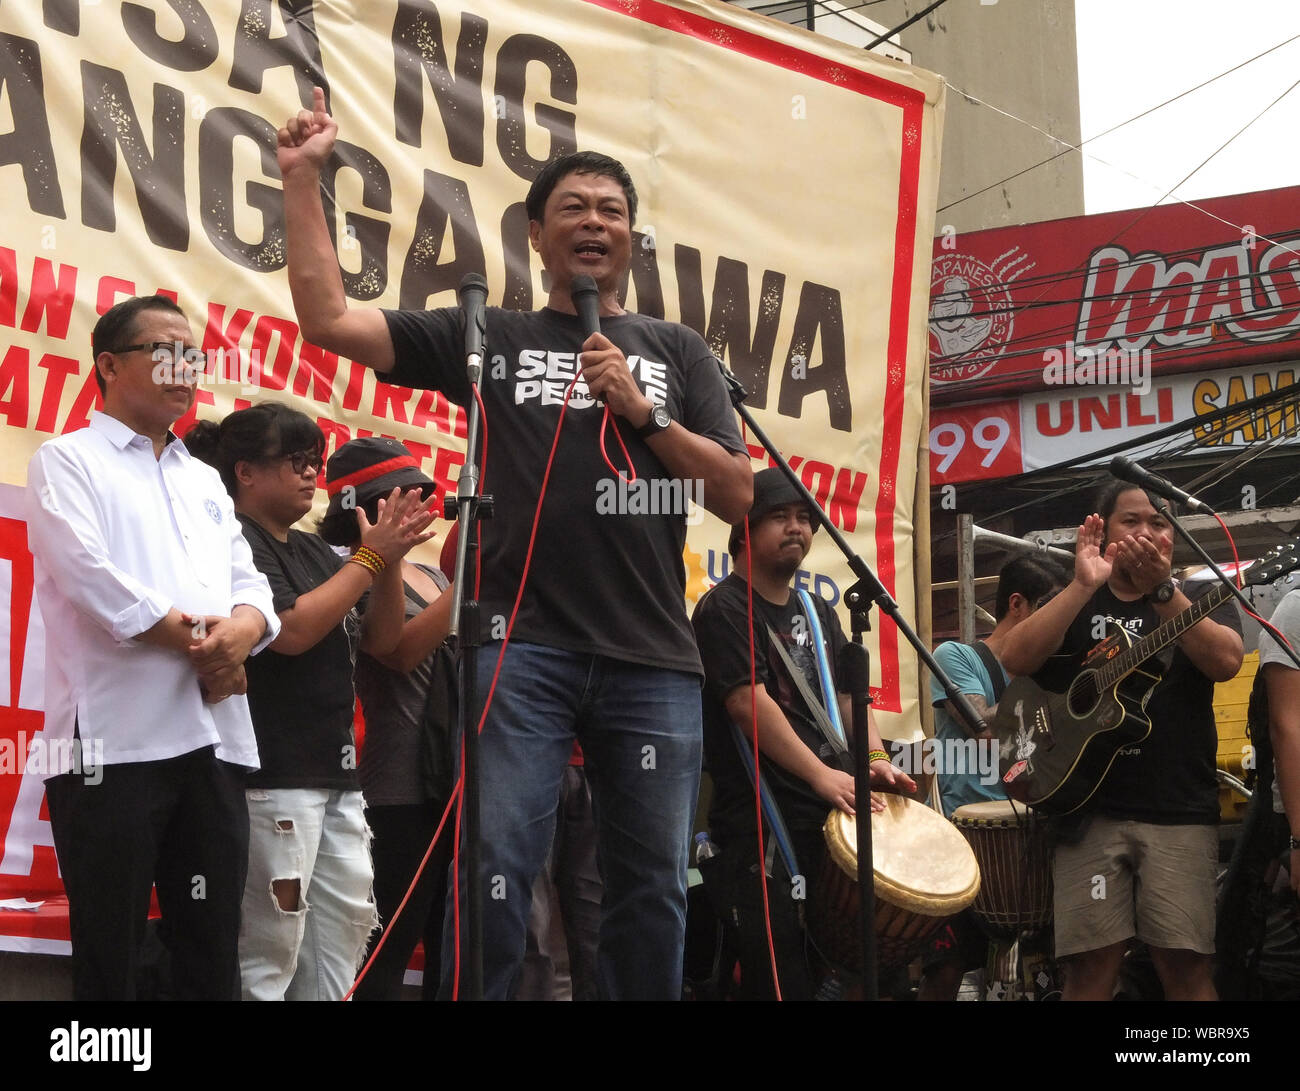 Elmer Labog, United Workers spokesperson speaks to the crowd during the demonstration.Thousands of workers took to the streets as the Philippines marked National Heroes' Day. They call it the 'Martsa ng Manggagawa Laban sa Kontraktwalisasyon' (Workers' March Against Contractualization). They slammed the Duterte Government for allegedly turning a blind eye to the abuses suffered by workers. The United workers calling for an end to 'ENDO' or end of contractualization of workers and the increase of minimum wage of workers to 750 pesos. Stock Photo